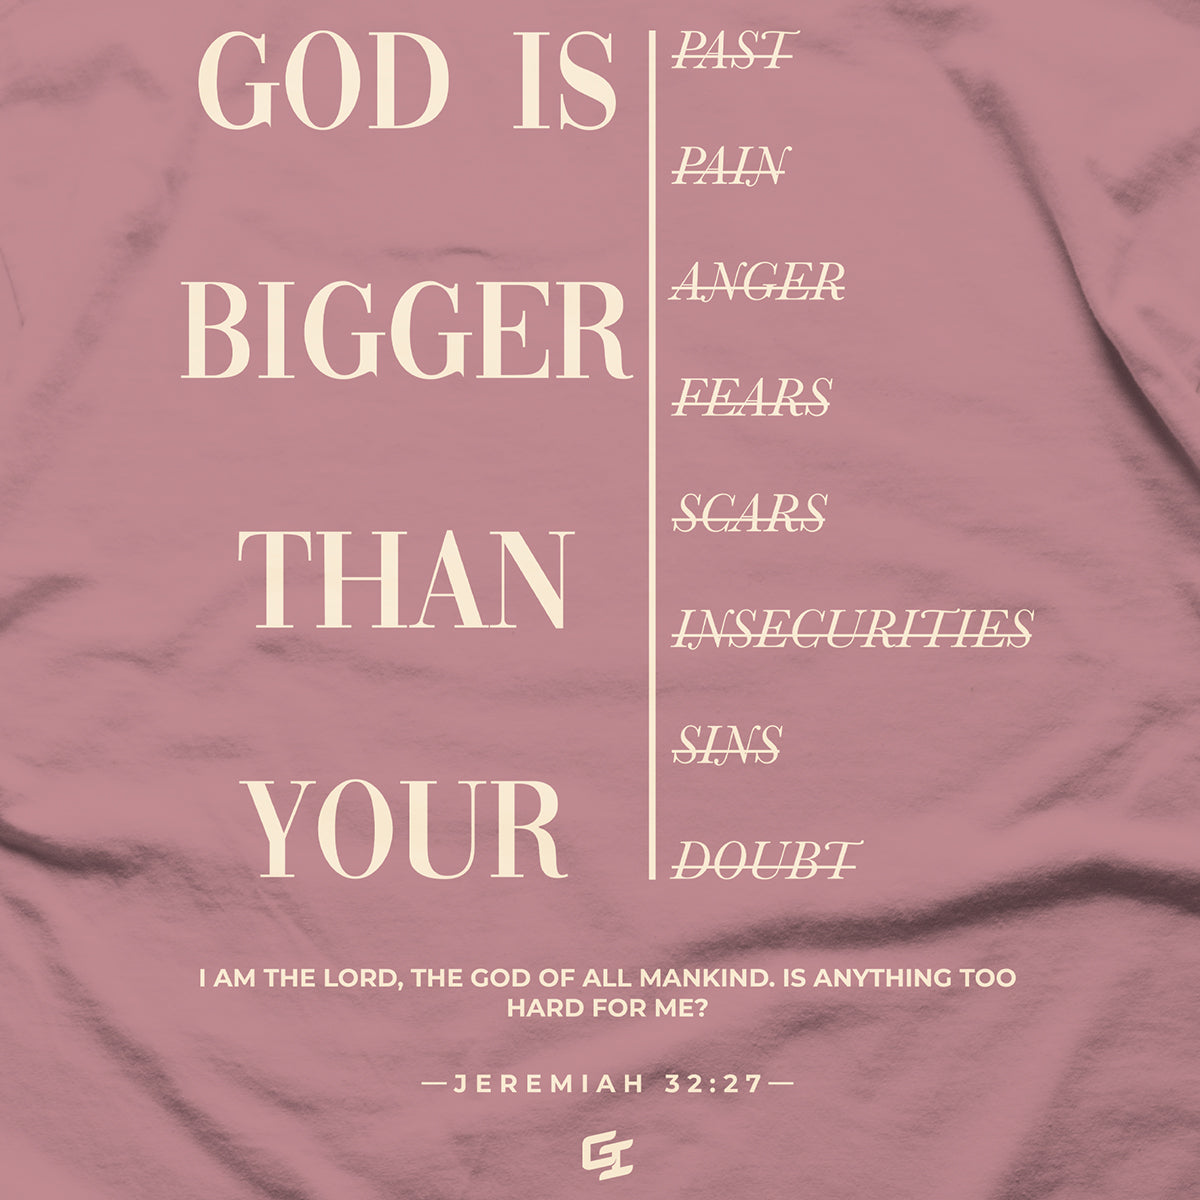 [Limited Edition] Epiphany 'God Is Bigger Than Your...' Lightweight T-Shirt